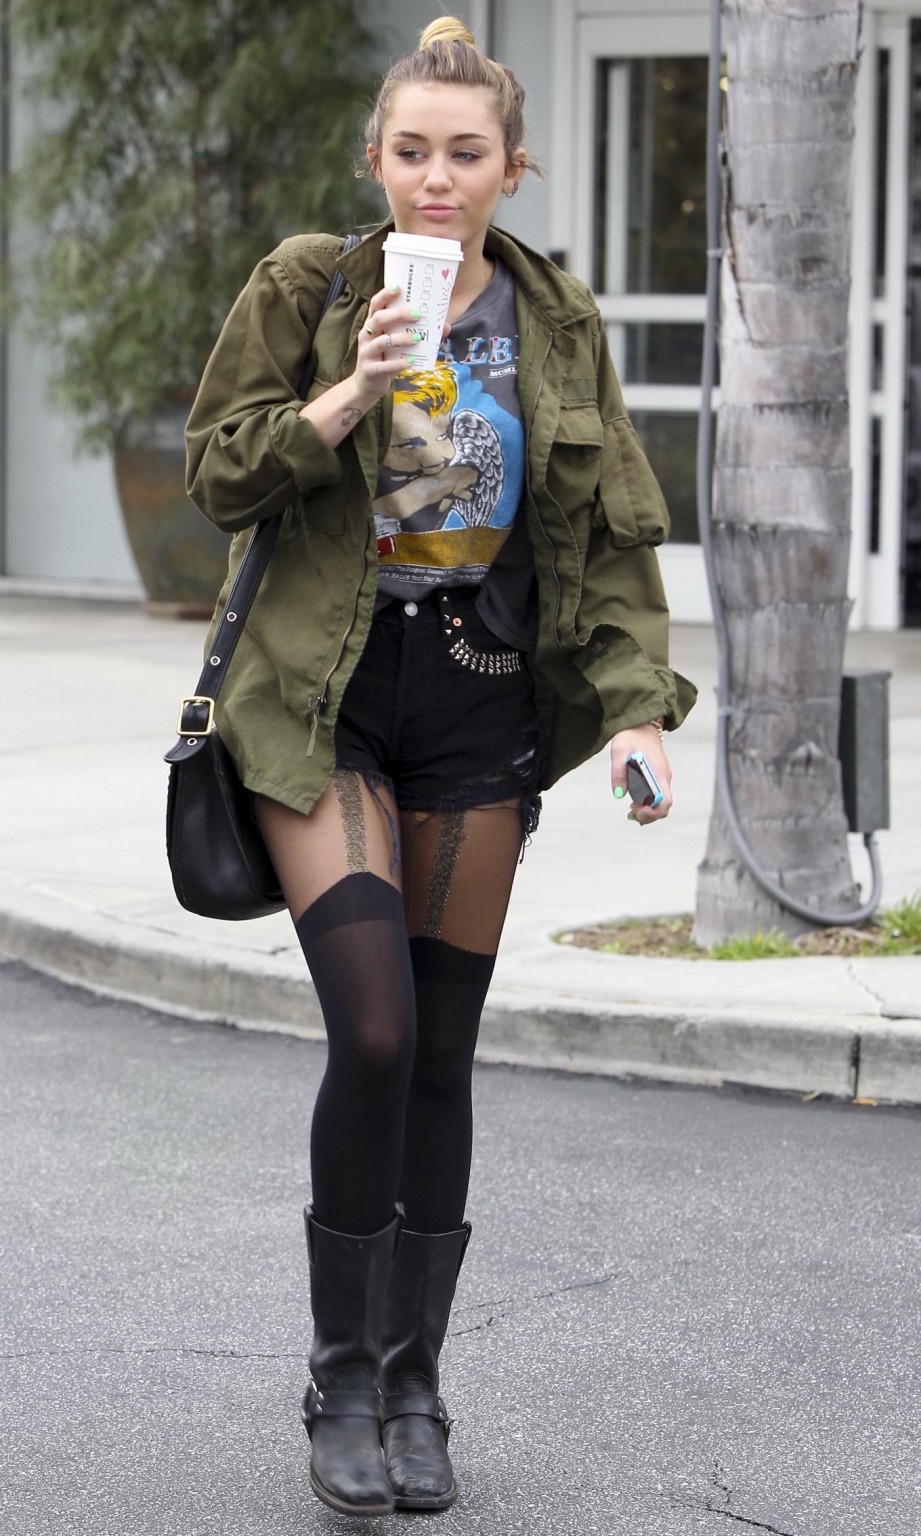 Miley Cyrus leggy wearing stockings  biker boots outside Starbucks in Hollywood #75274284